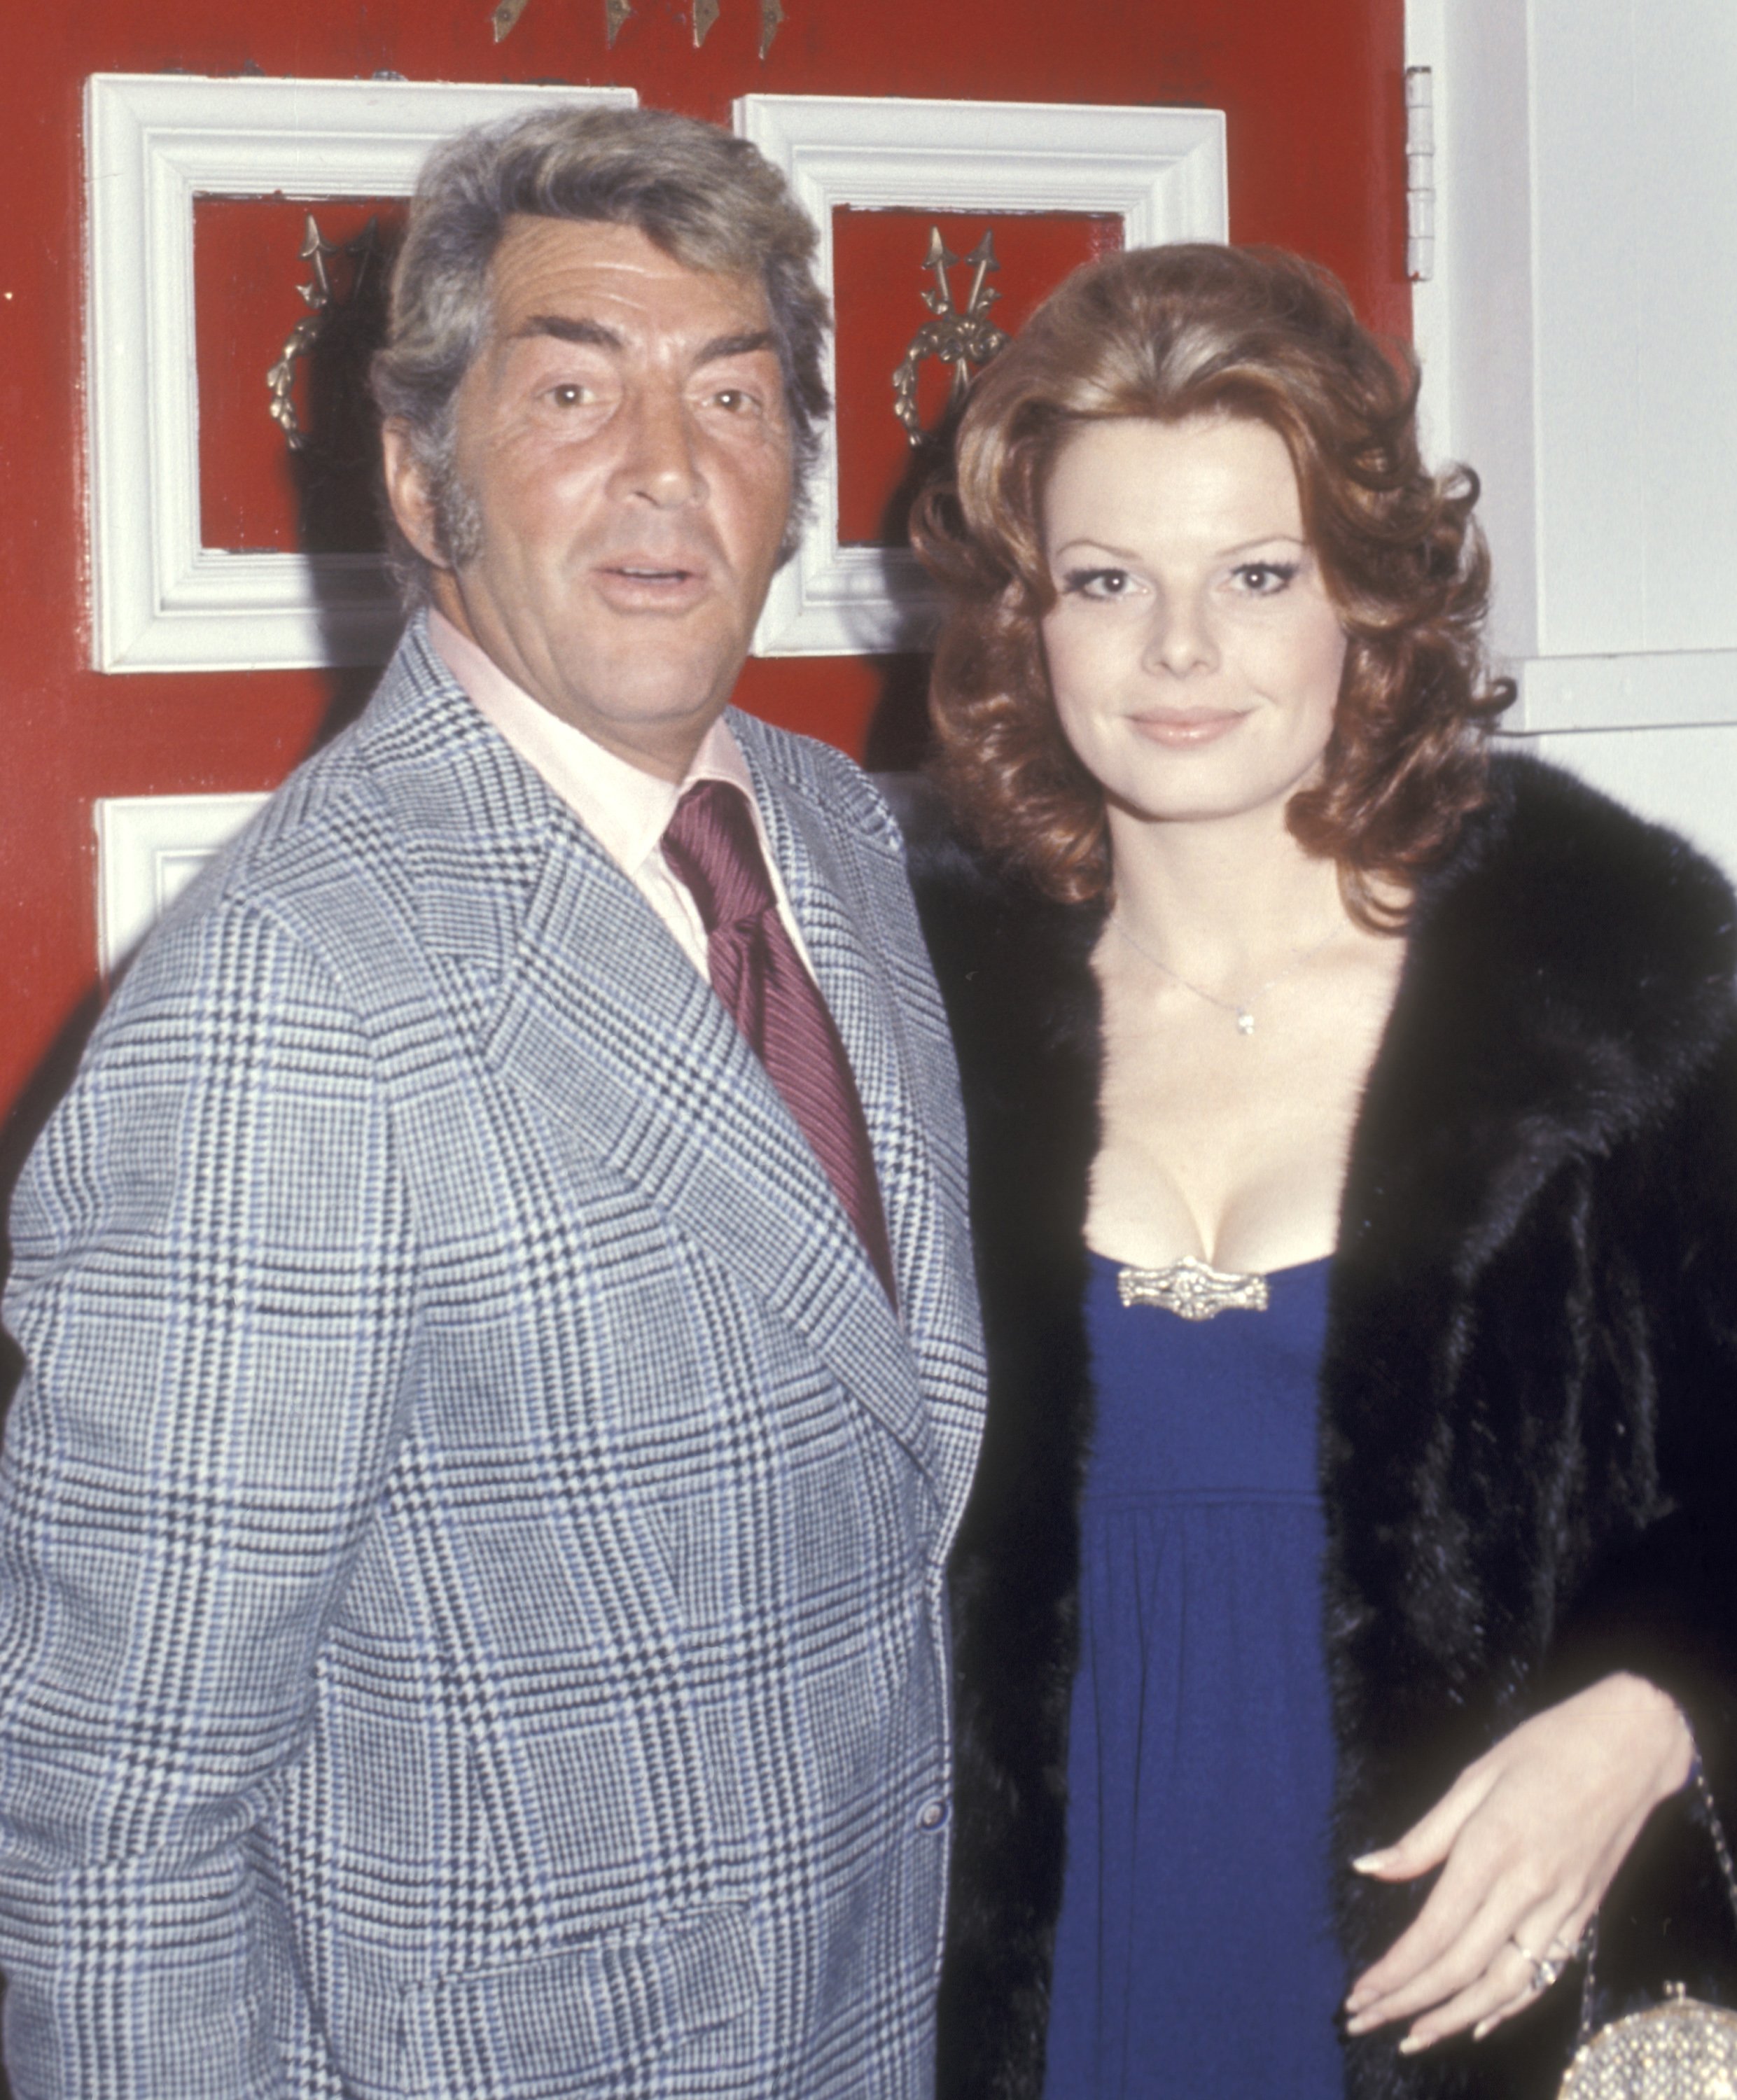 Dean Martin and wife, Catherine Hawn, on January 28, 1973 dining at Rangoon Racquet Club in Beverly Hills, California. | Source: Getty Images